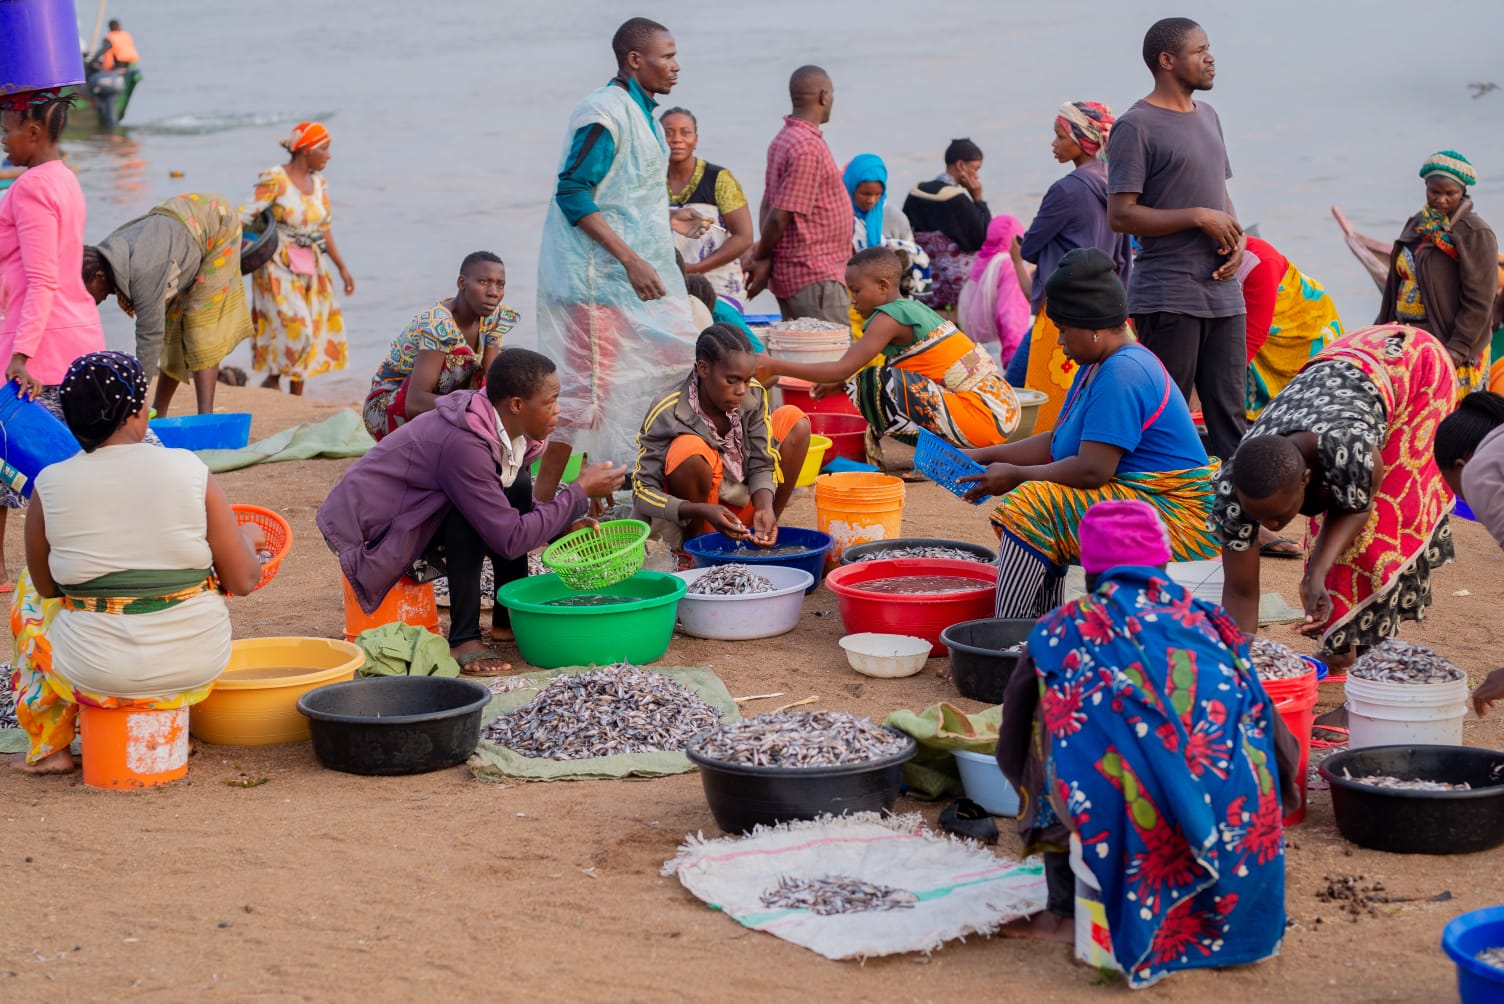 PODCAST Ep. 9: Women, fish and COVID impacts on African food systems